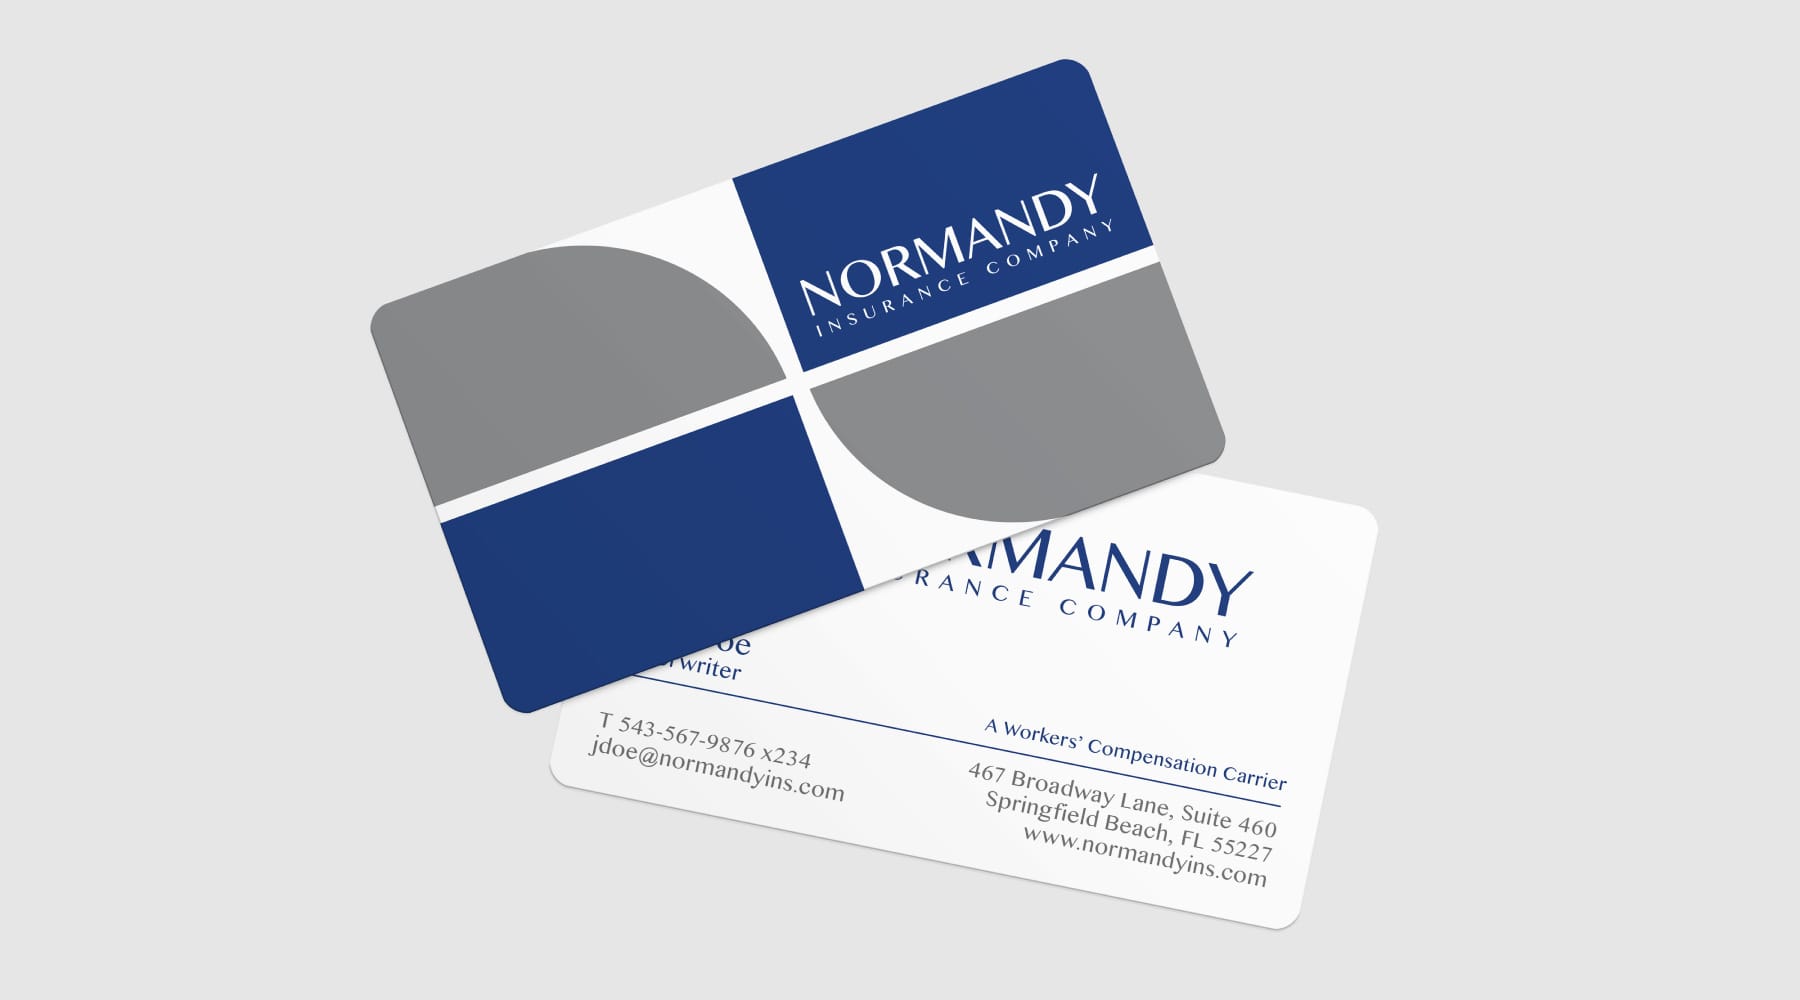 Normandy business card